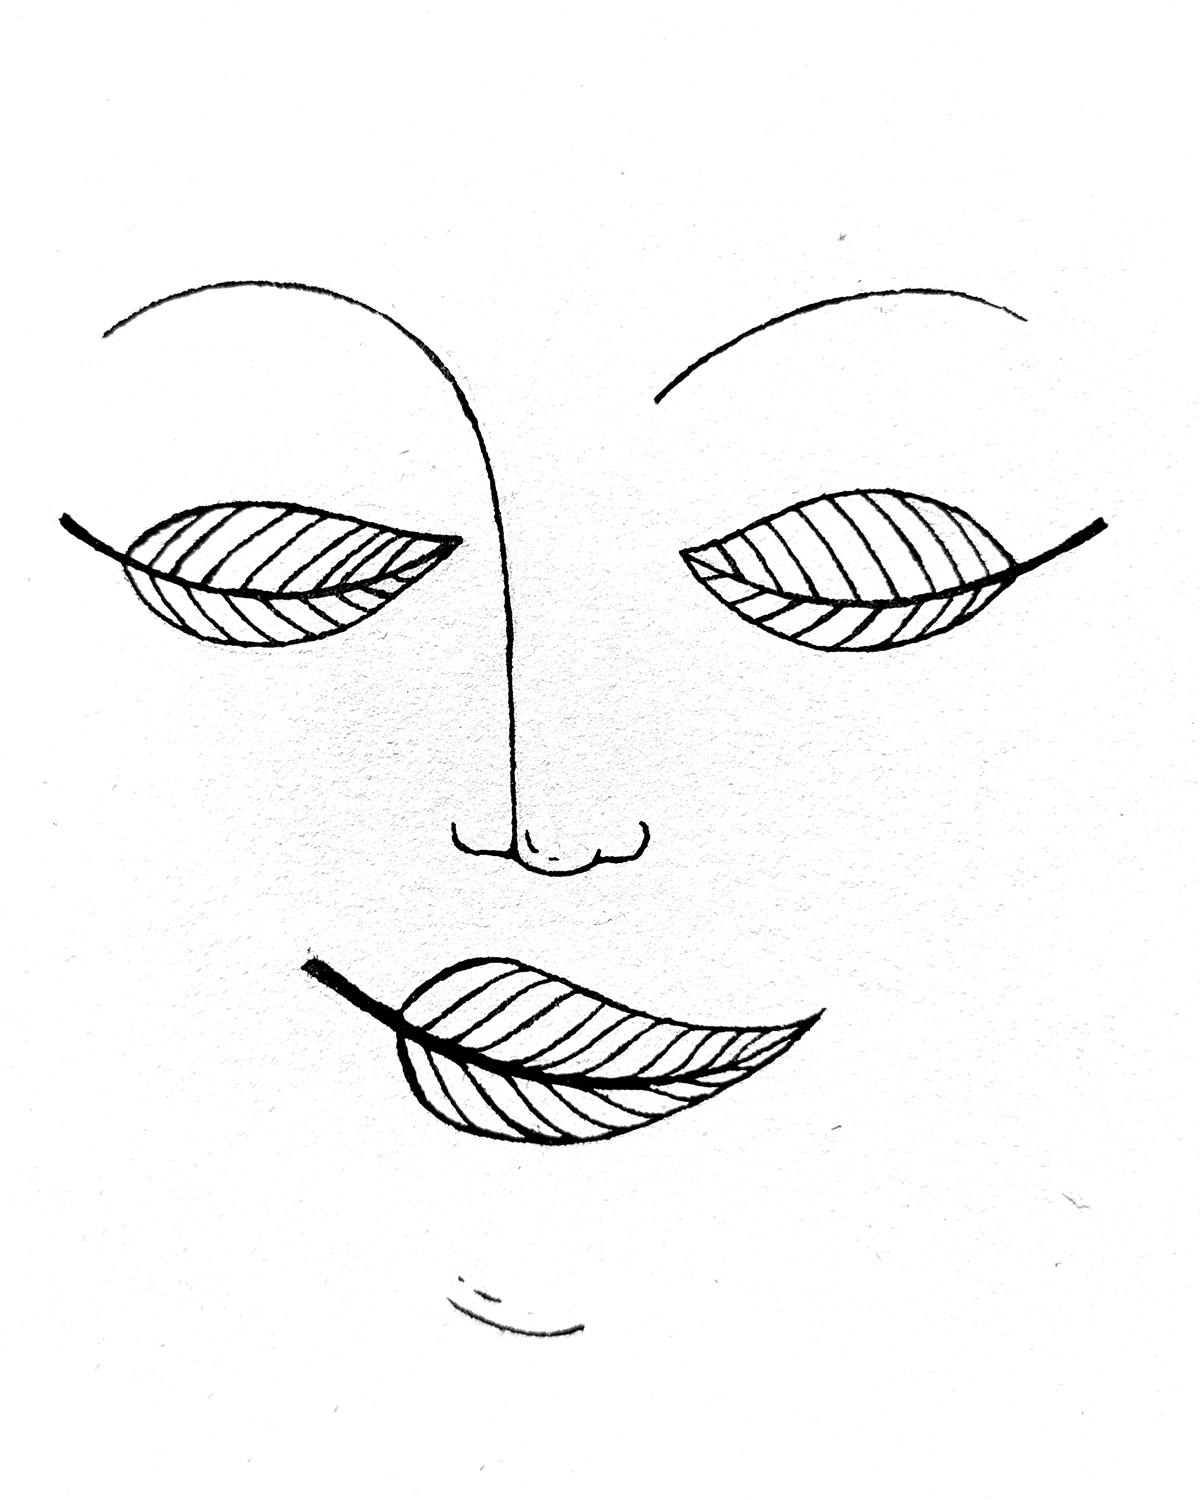 Joni Majer illustration of a face with leaves as facial features